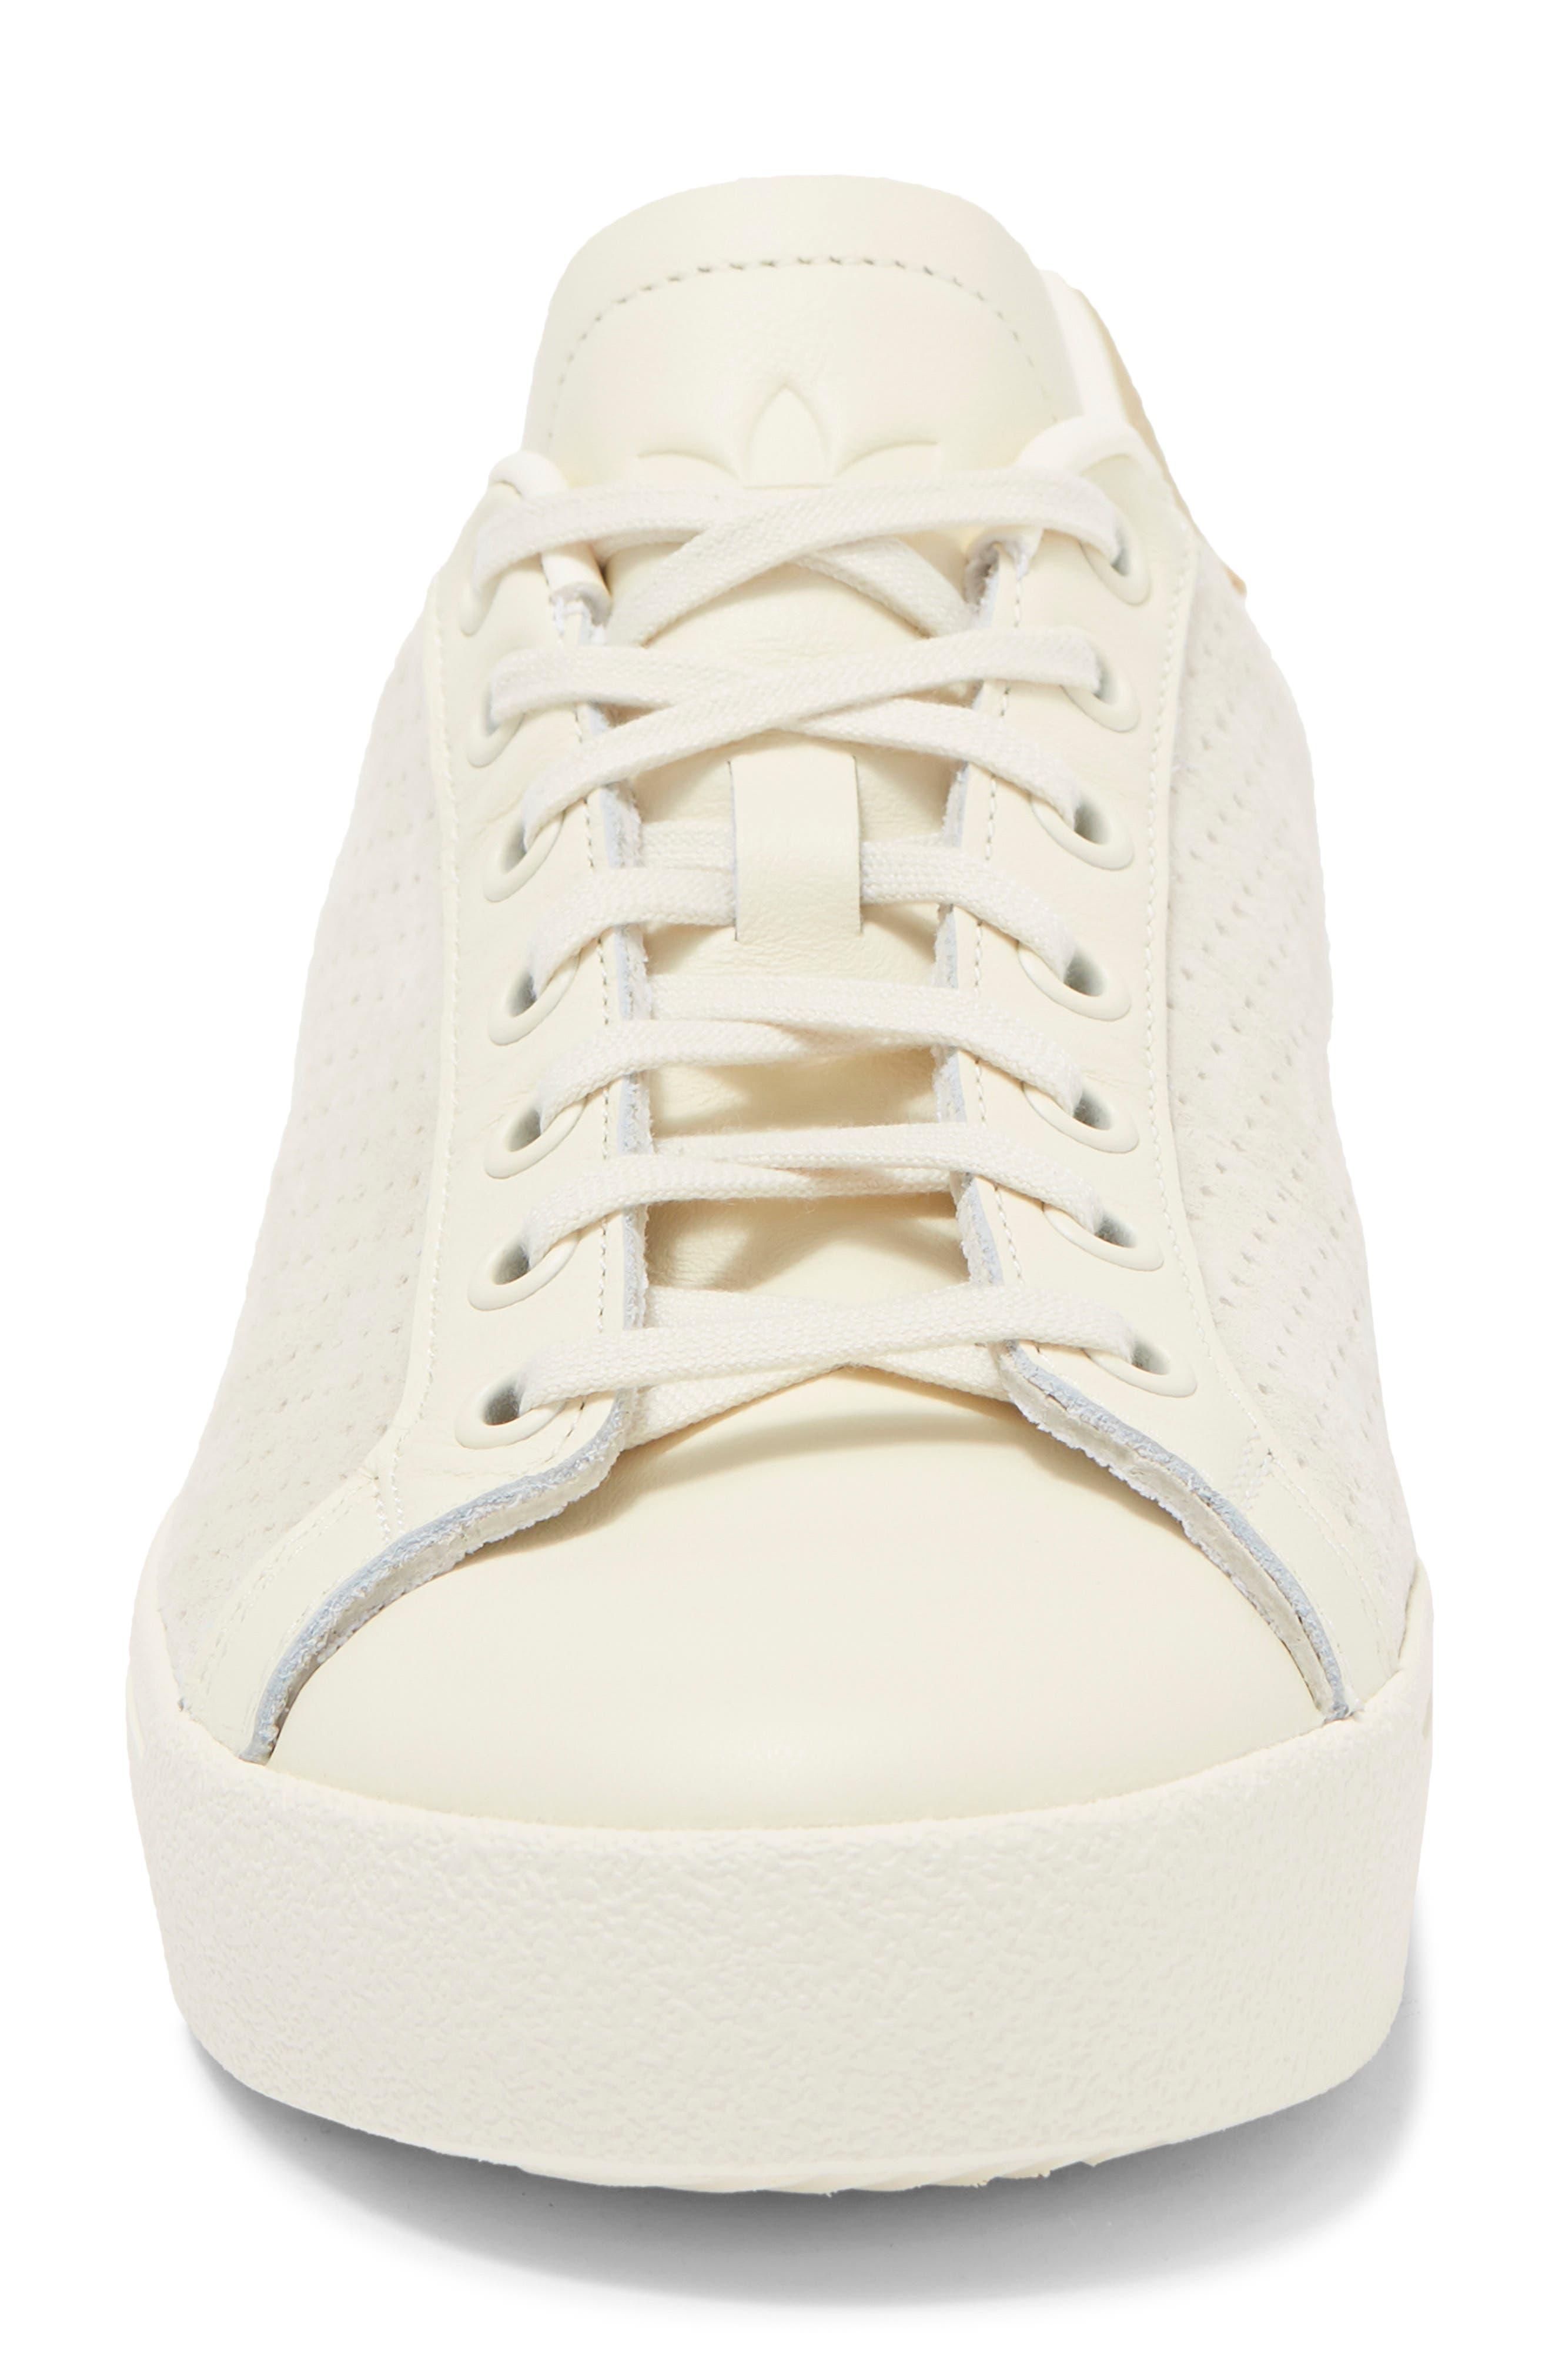 adidas Rod Laver Vintage Sneaker In Cwhite/beiton/cwhite At Nordstrom Rack  for Men | Lyst